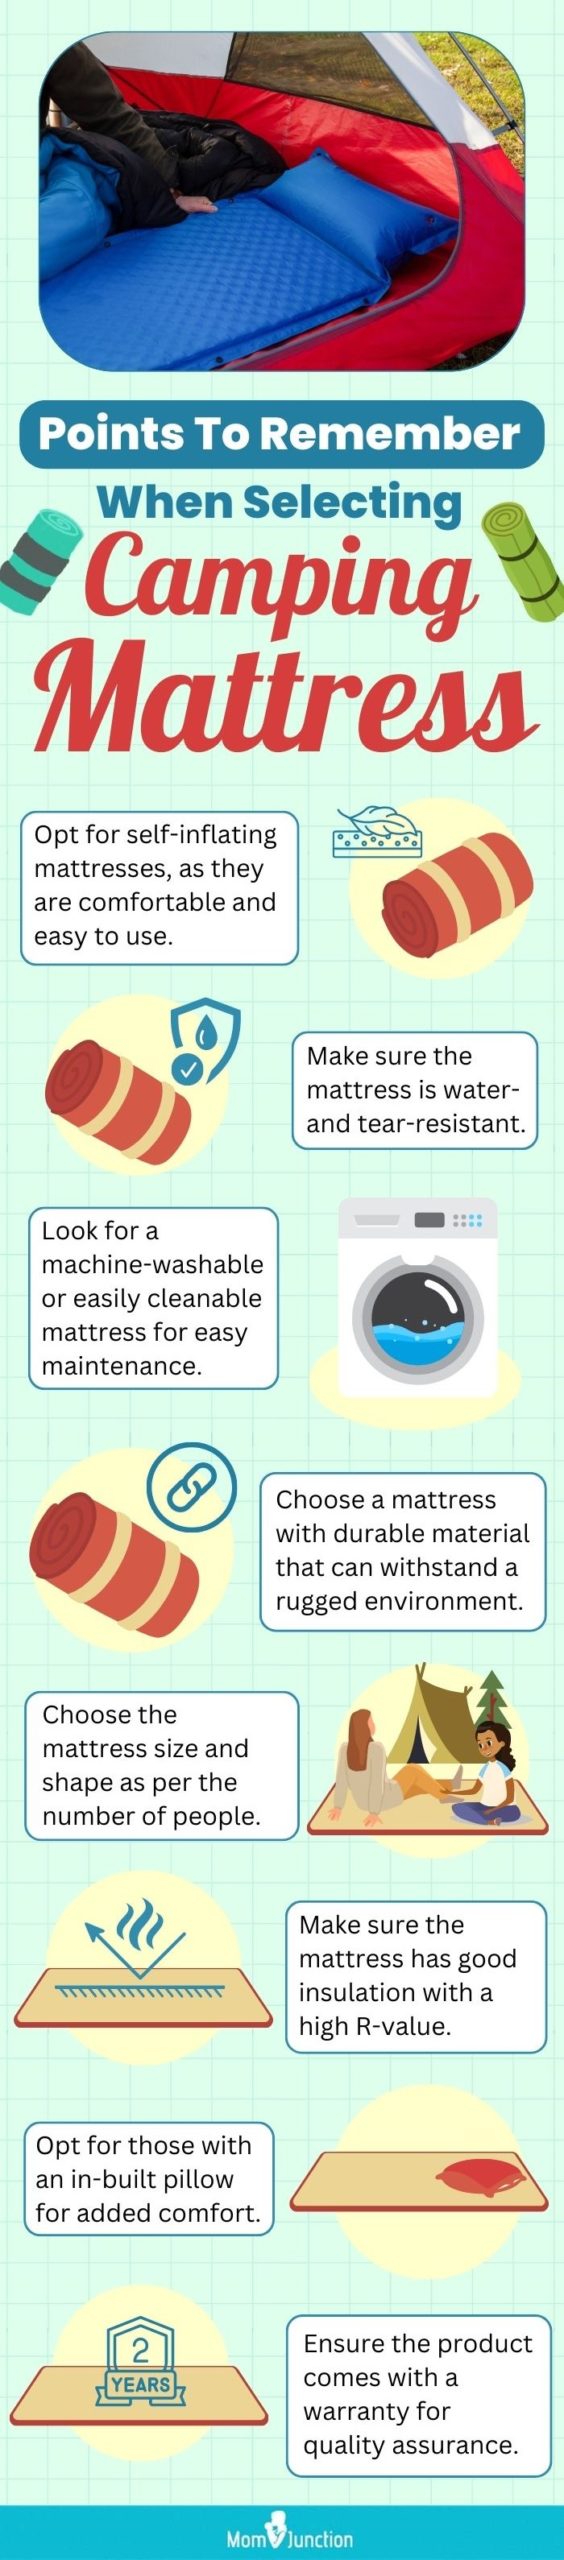 Points To Remember When Selecting Camping Mattress(infographic)